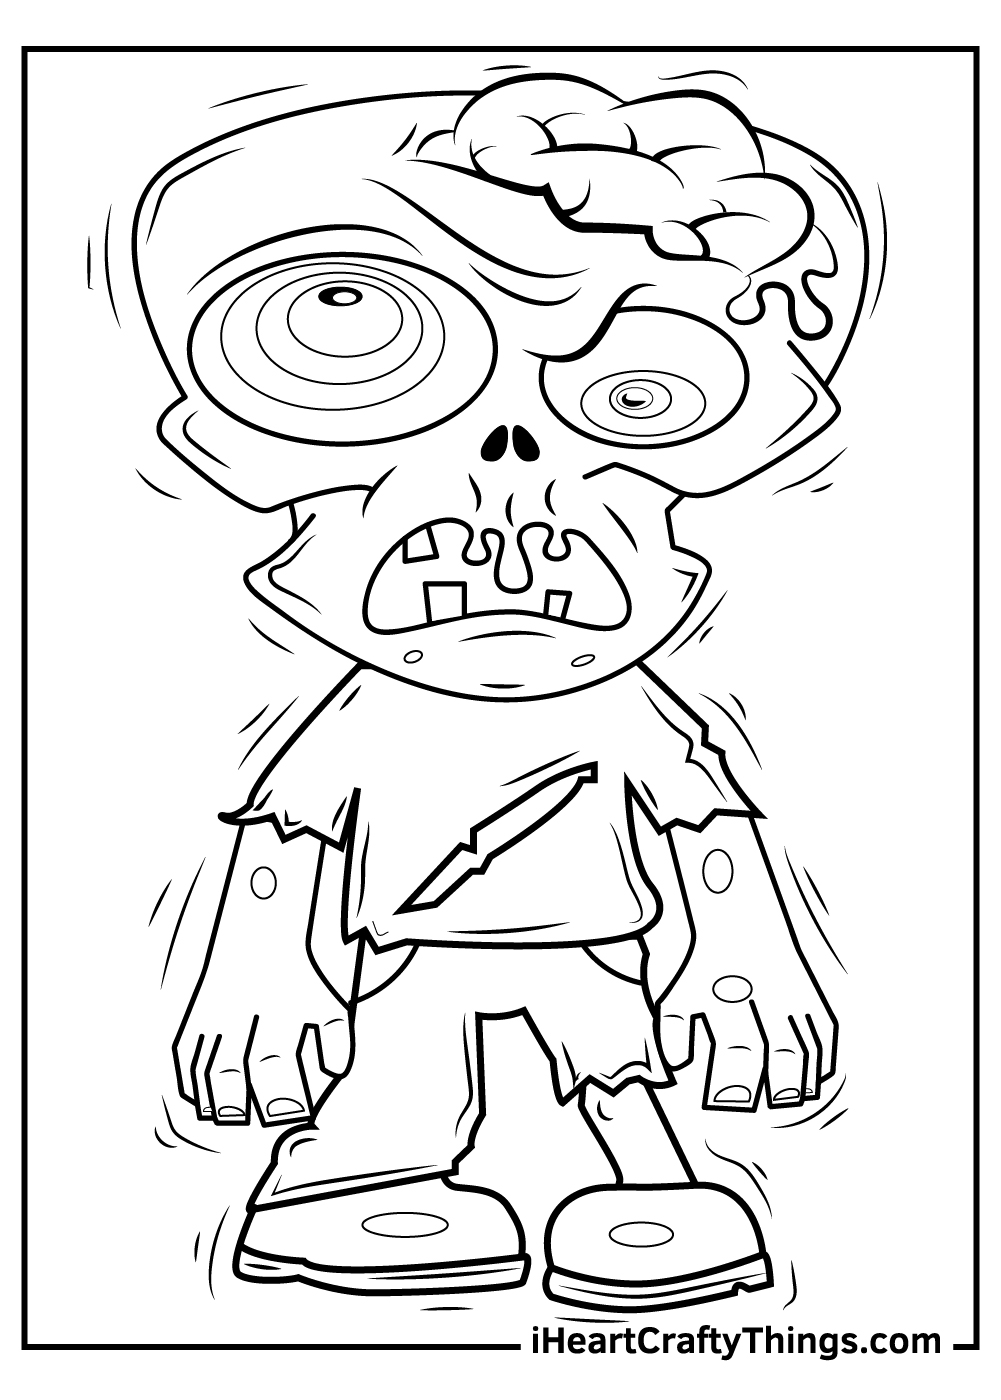 Zombie coloring pages free printables